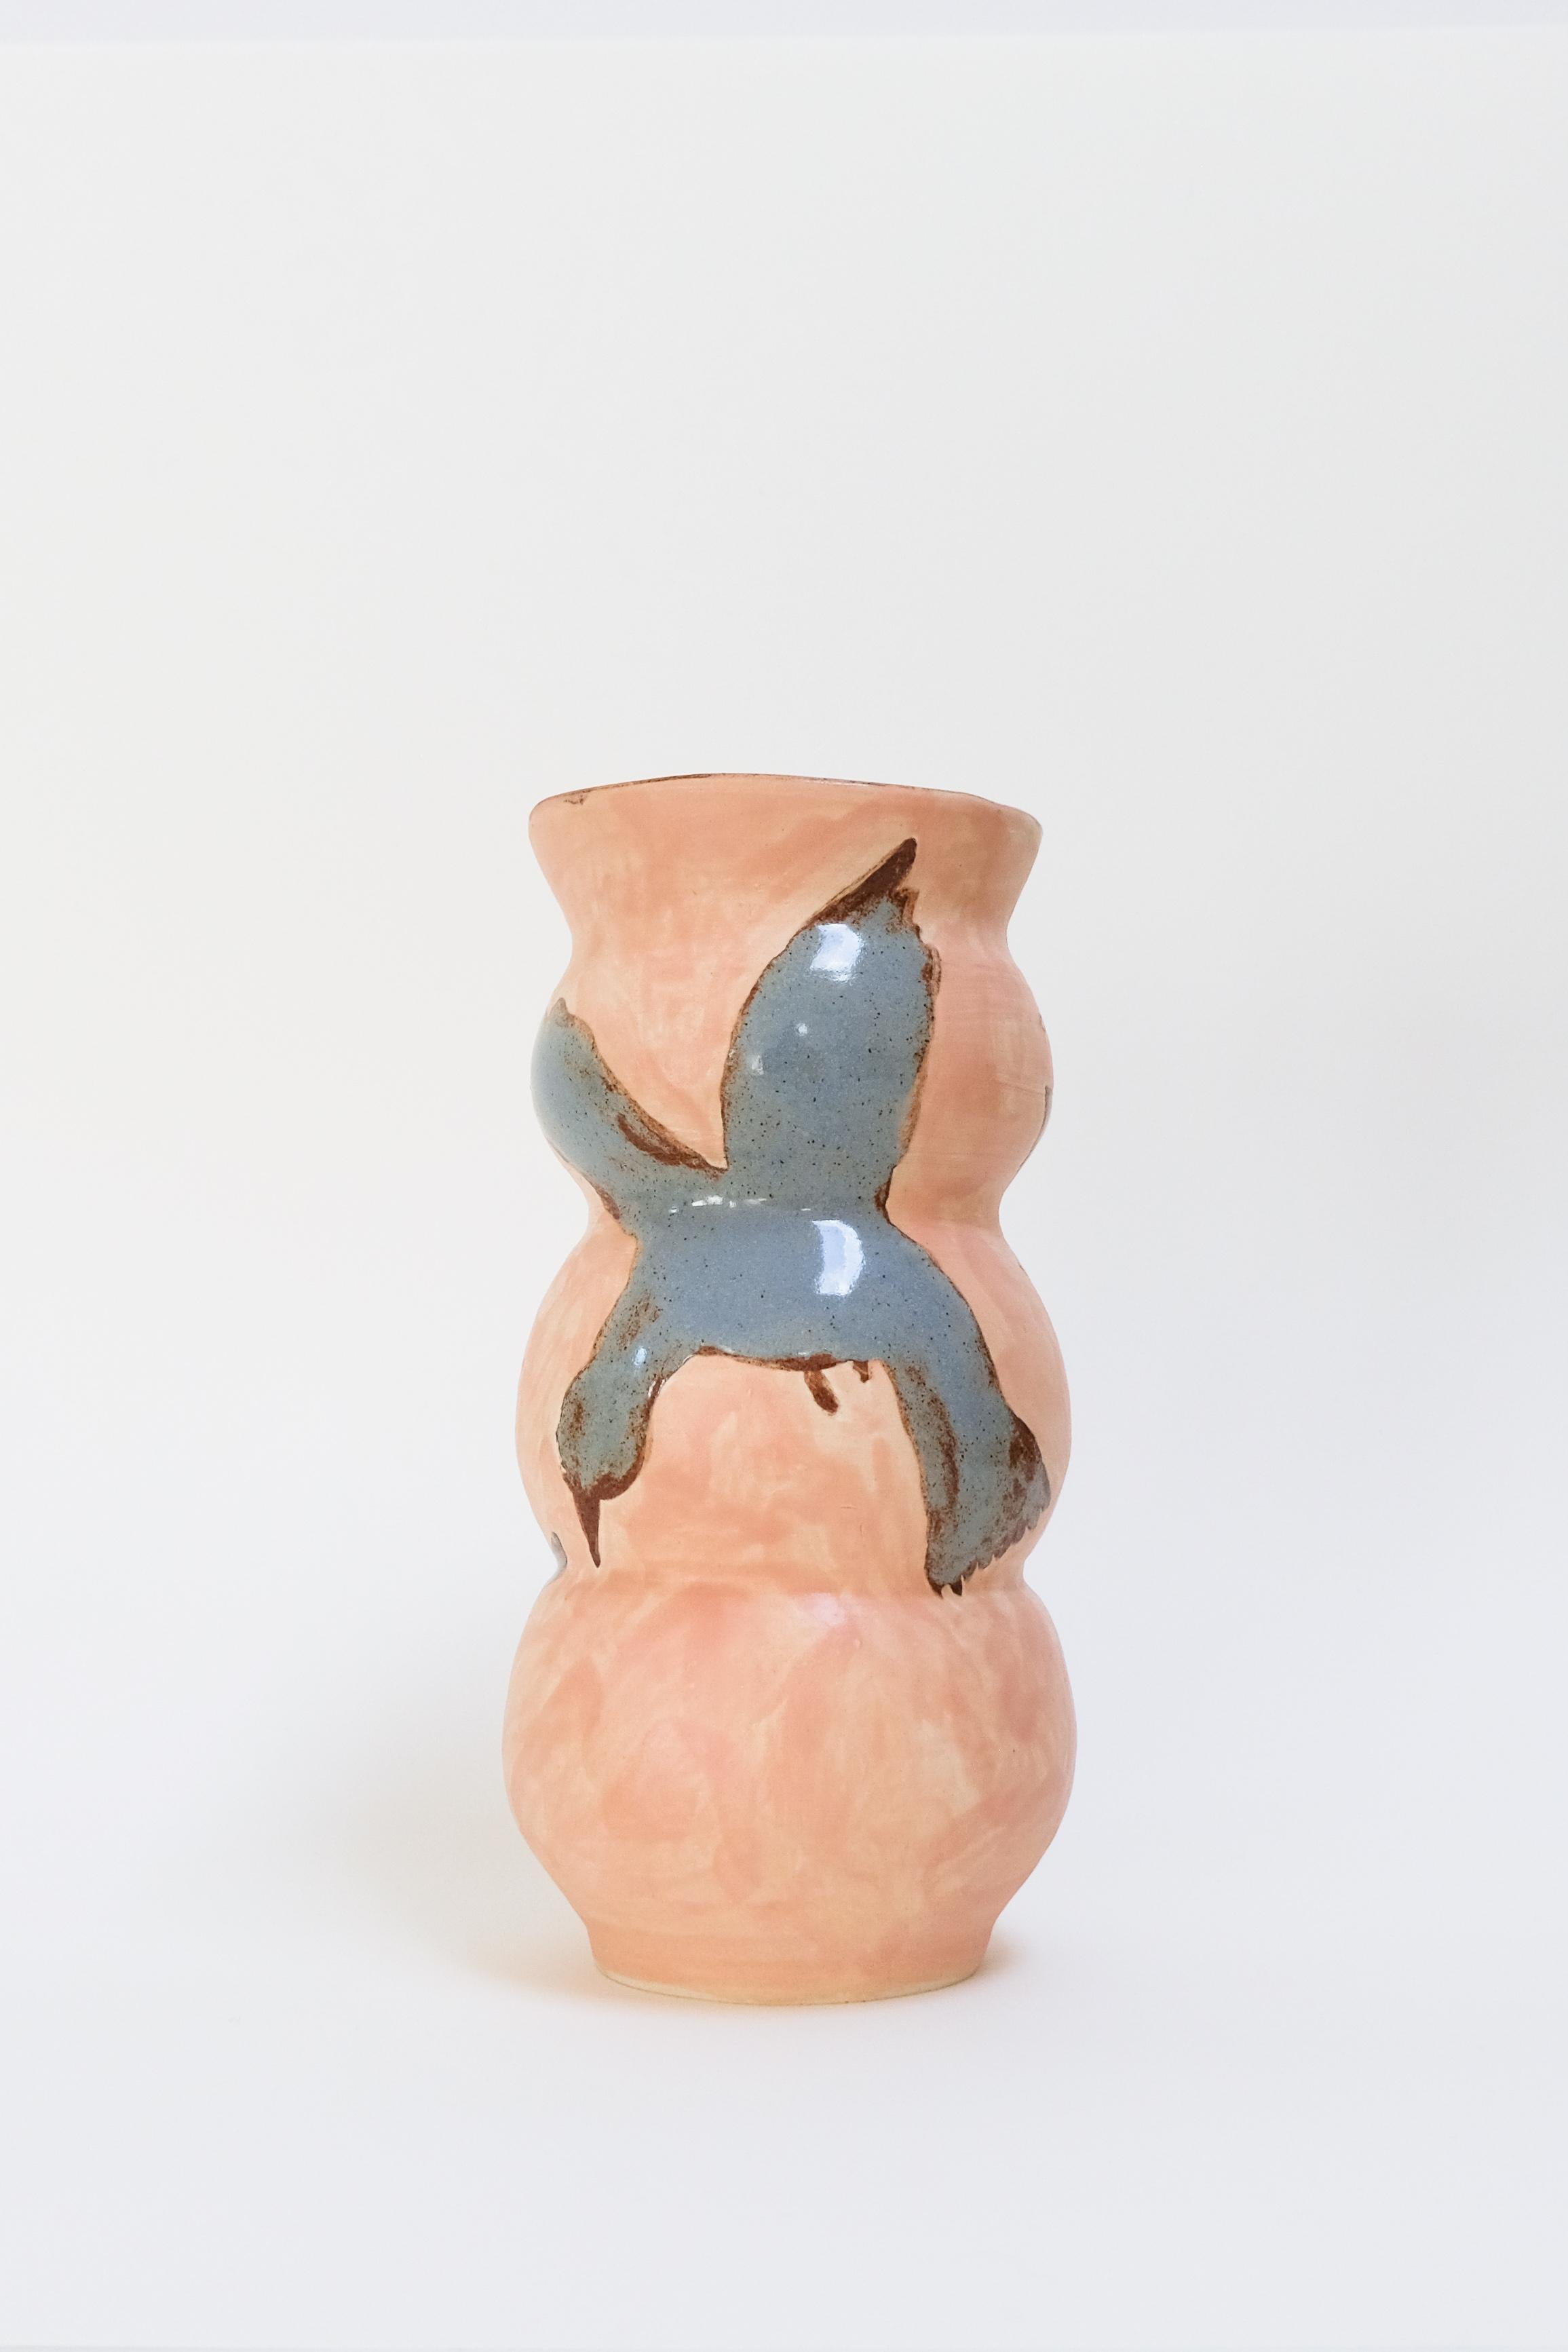 Intertwined - contemporary warm botanical bird abstract ceramic vase, functional - Art by Misbah Ahmed